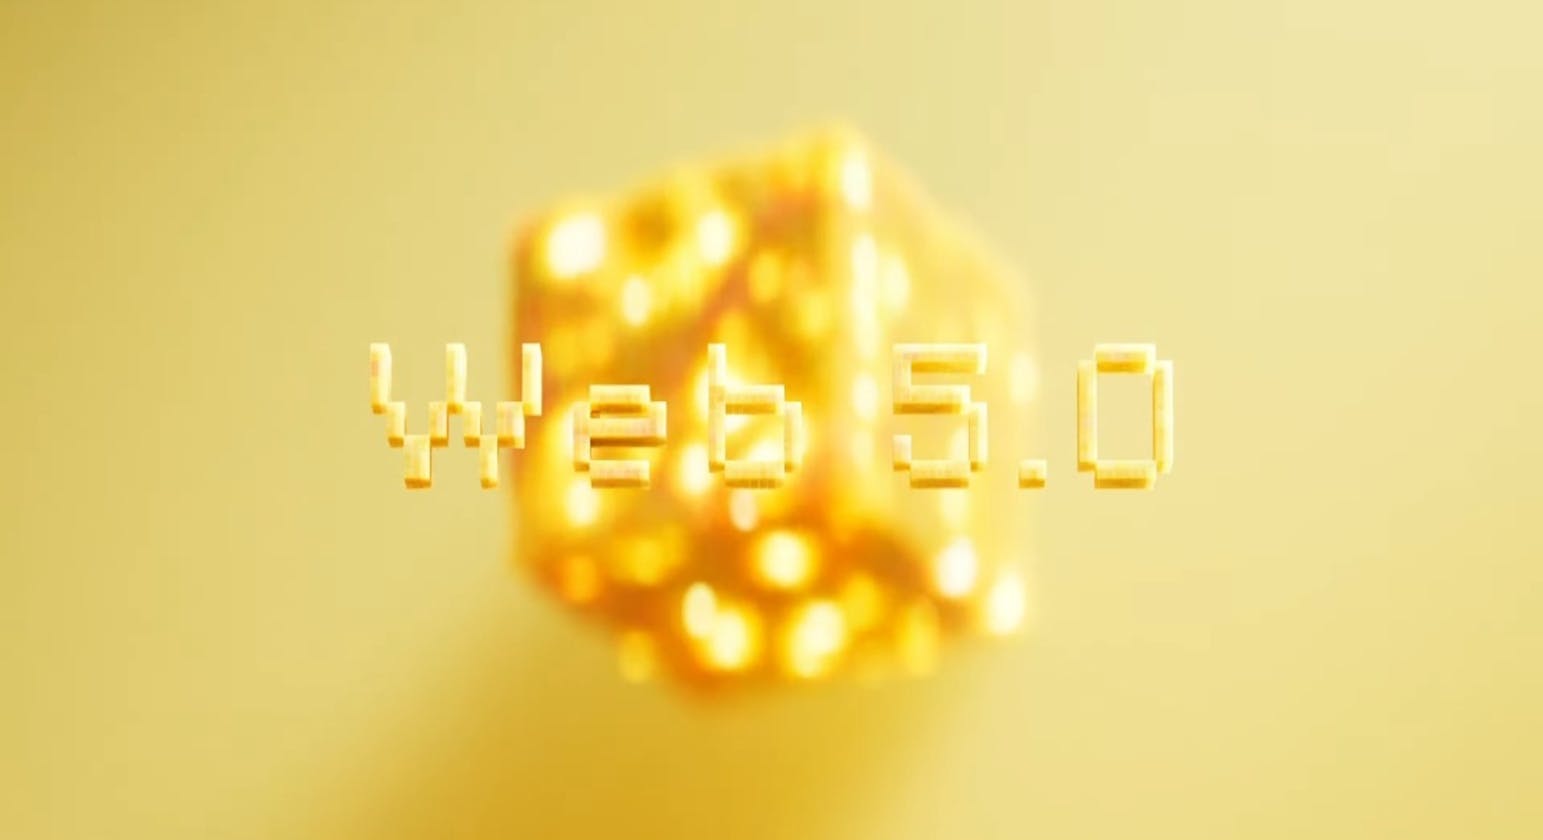 Ever heard of Web5?
Delve in, let's figure it out together.